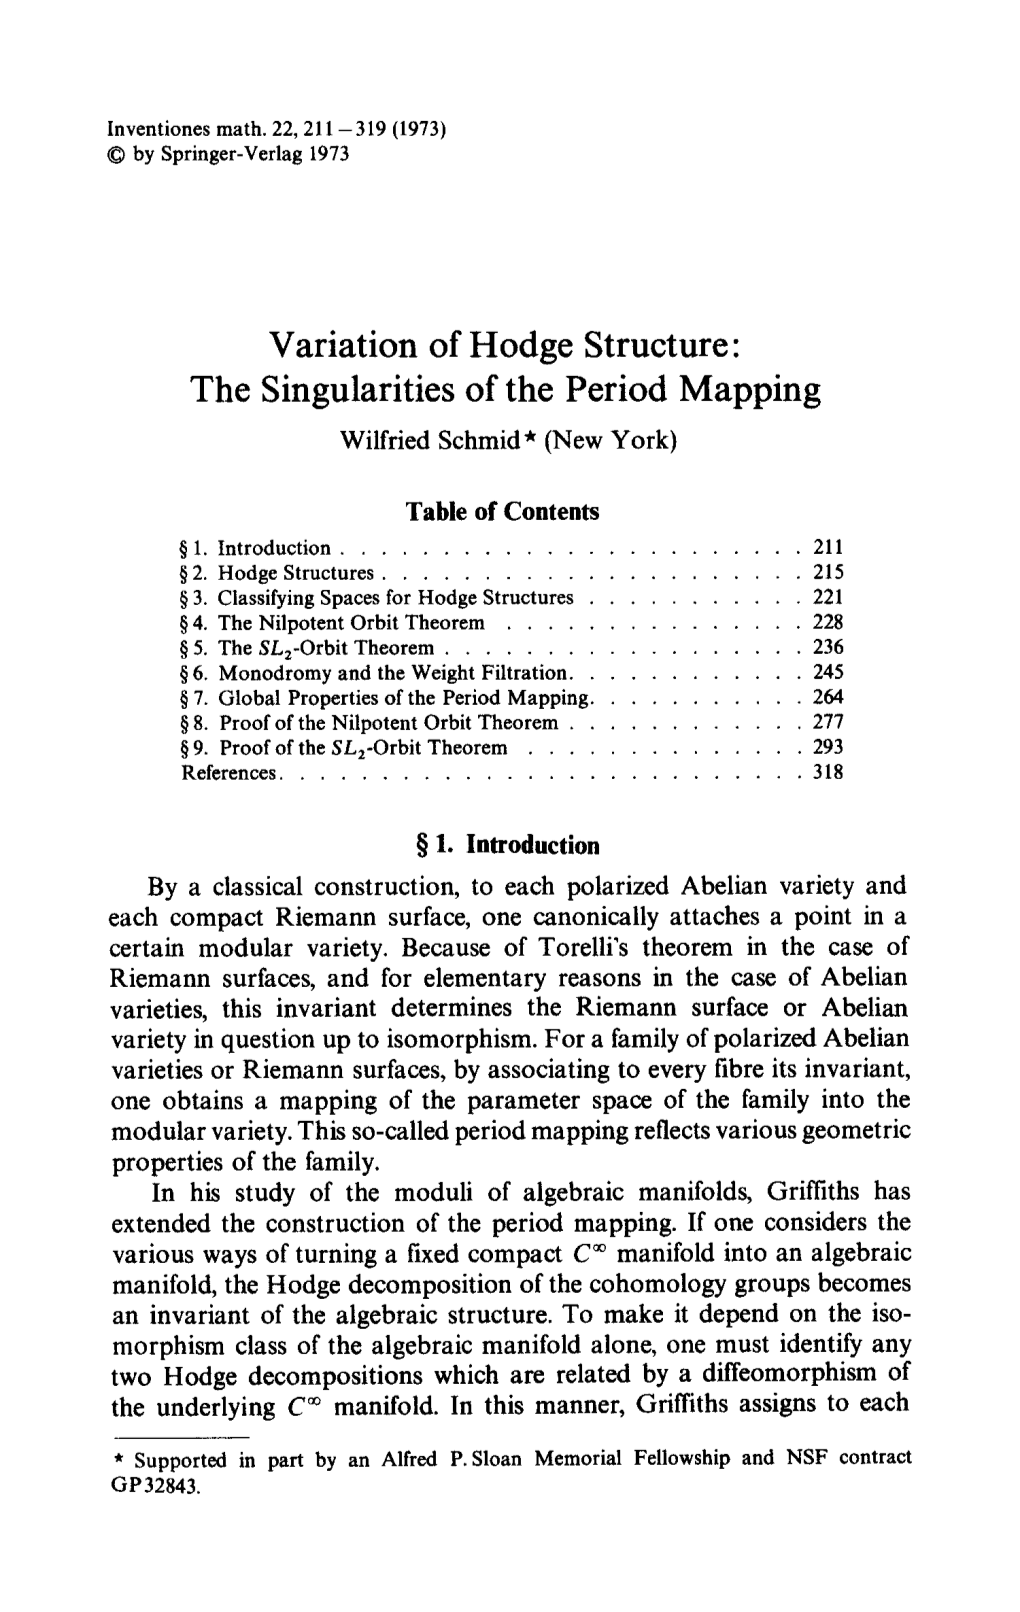 Variation of Hodge Structure: the Singularities of the Period Mapping Wilfried Schmid* (New York)